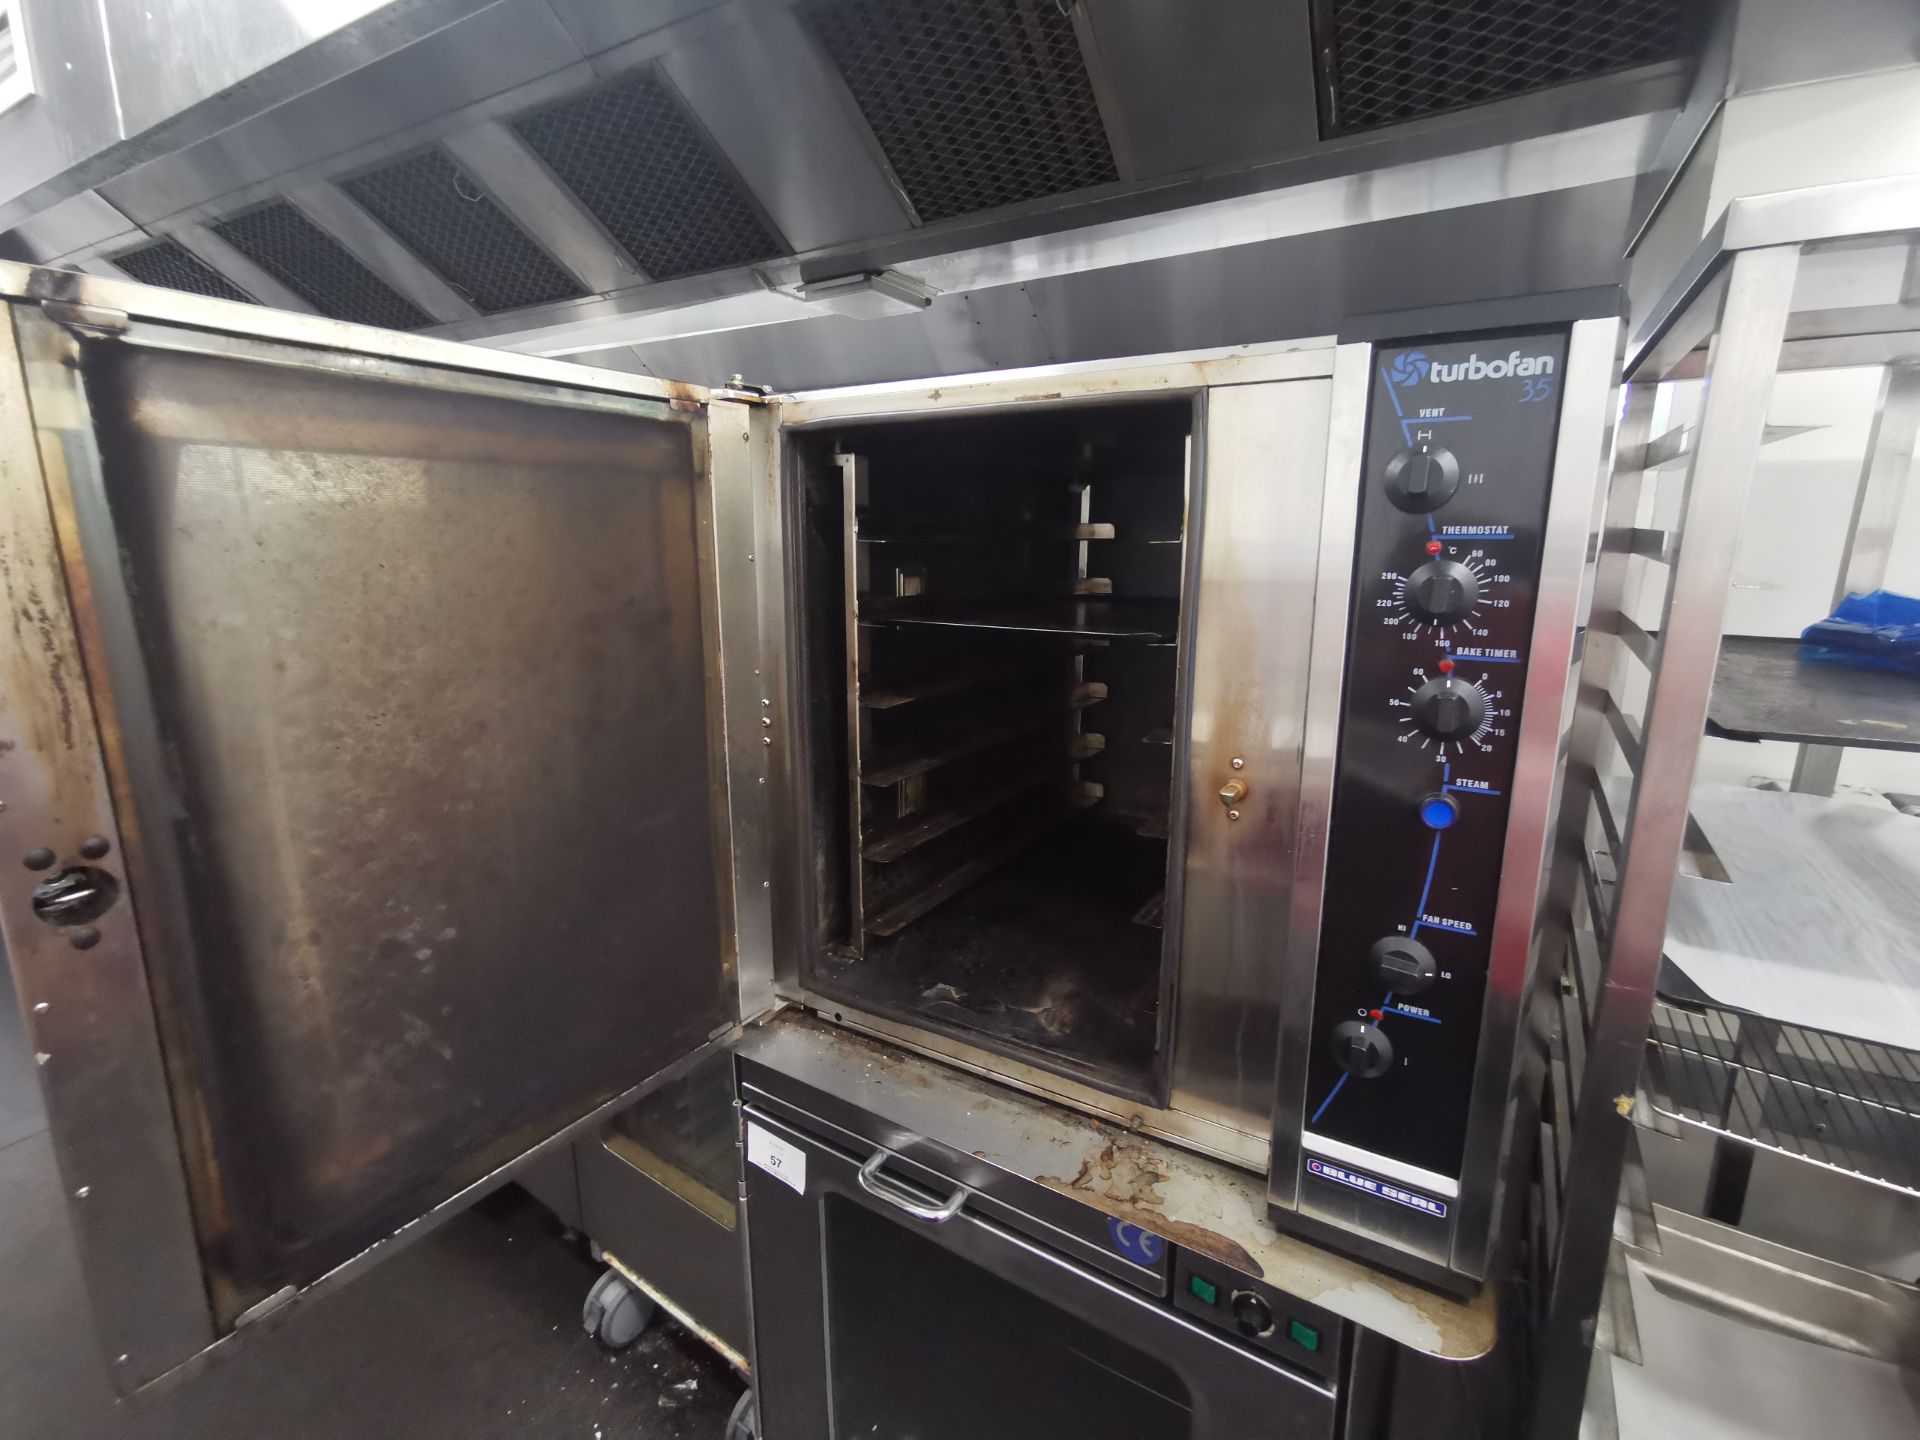 Blue seal turbo fan oven with steam function - Image 5 of 6